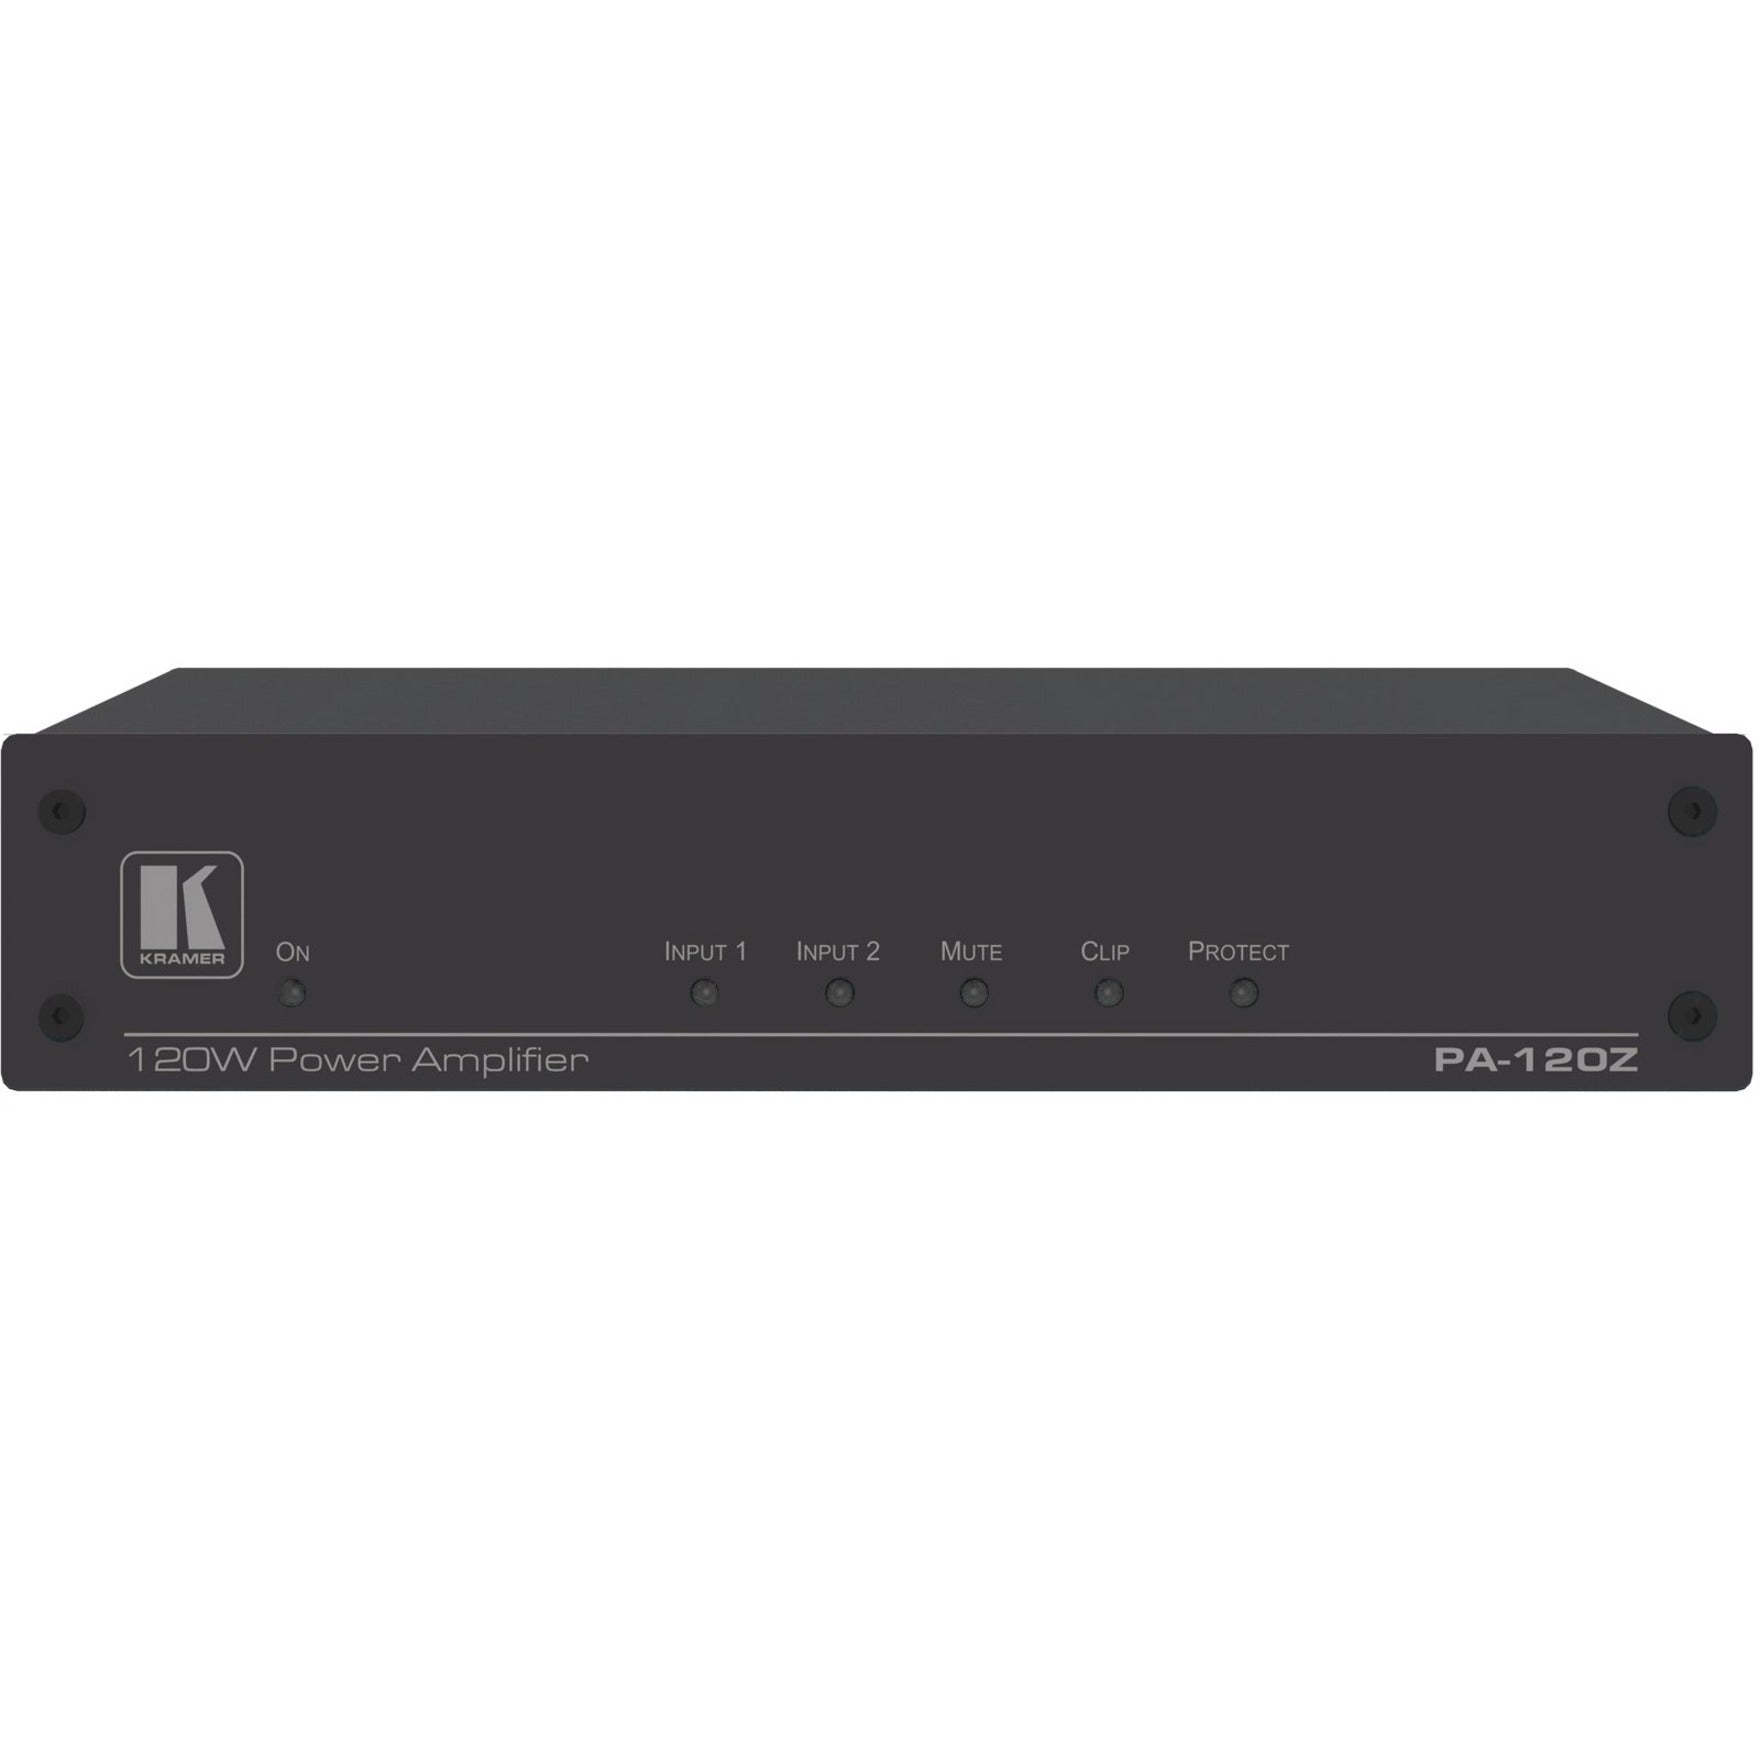 Kramer PA-120Z Power Amplifier (1x120W @70V/100V & 2x60W @8Ω), 120W RMS, 2 Channel